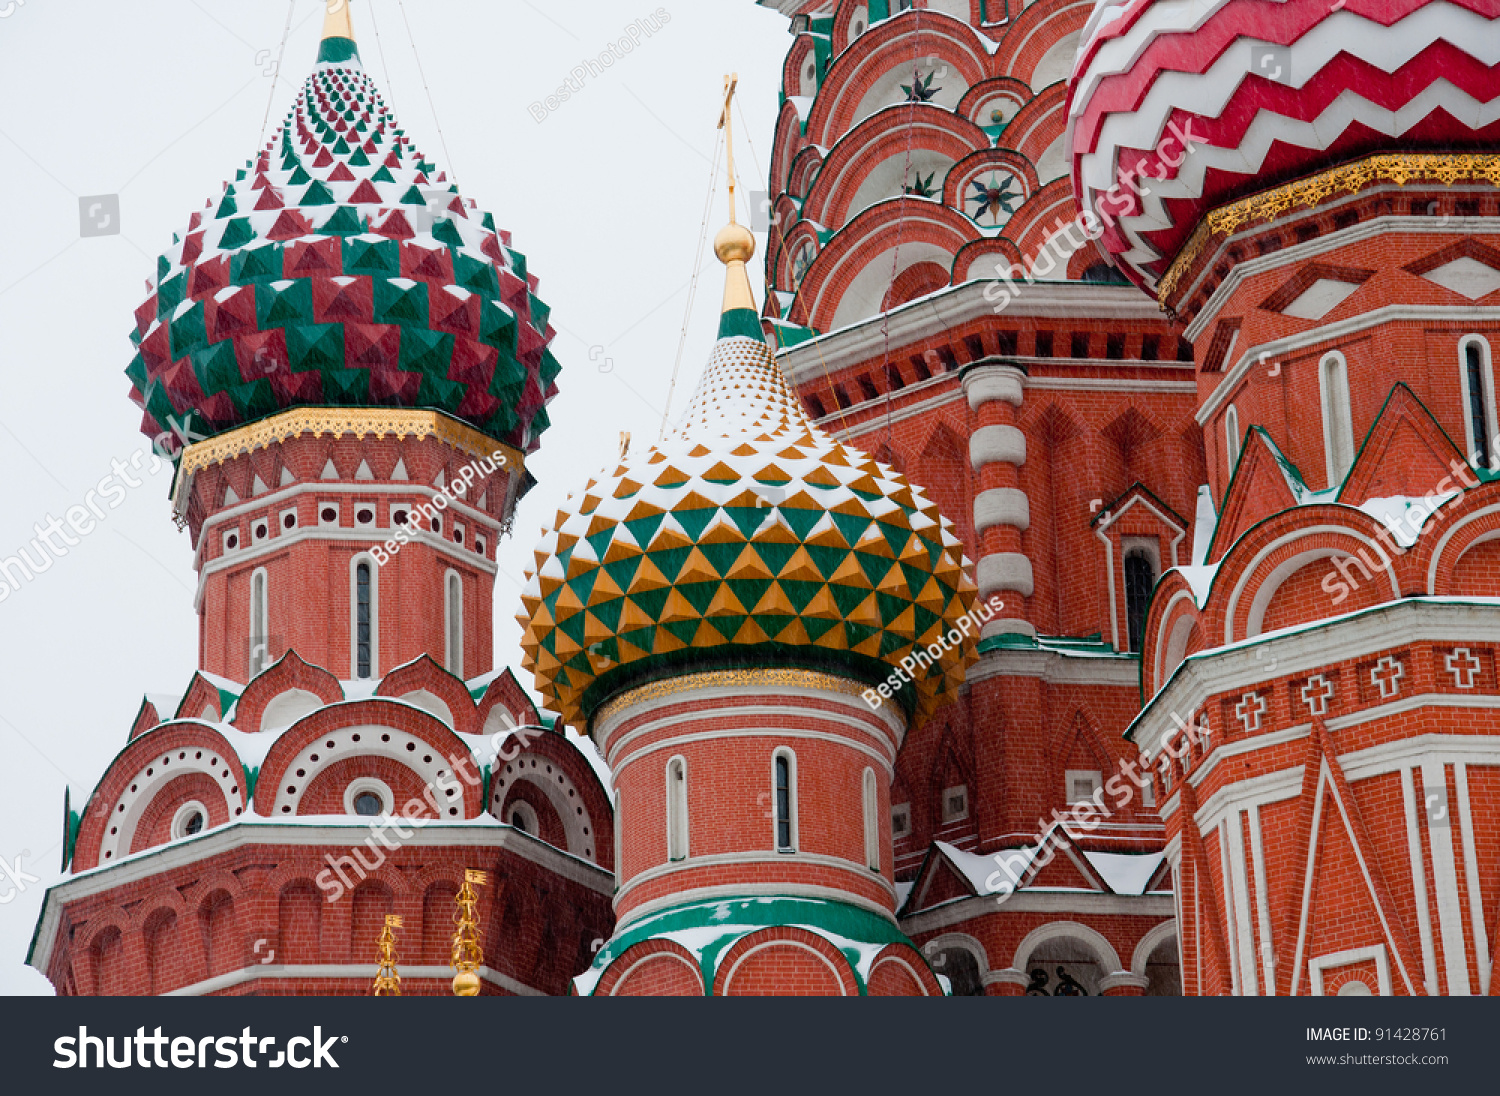 stock-photo-st-basil-s-cathedral-in-the-snow-moscow-russia-91428761.jpg